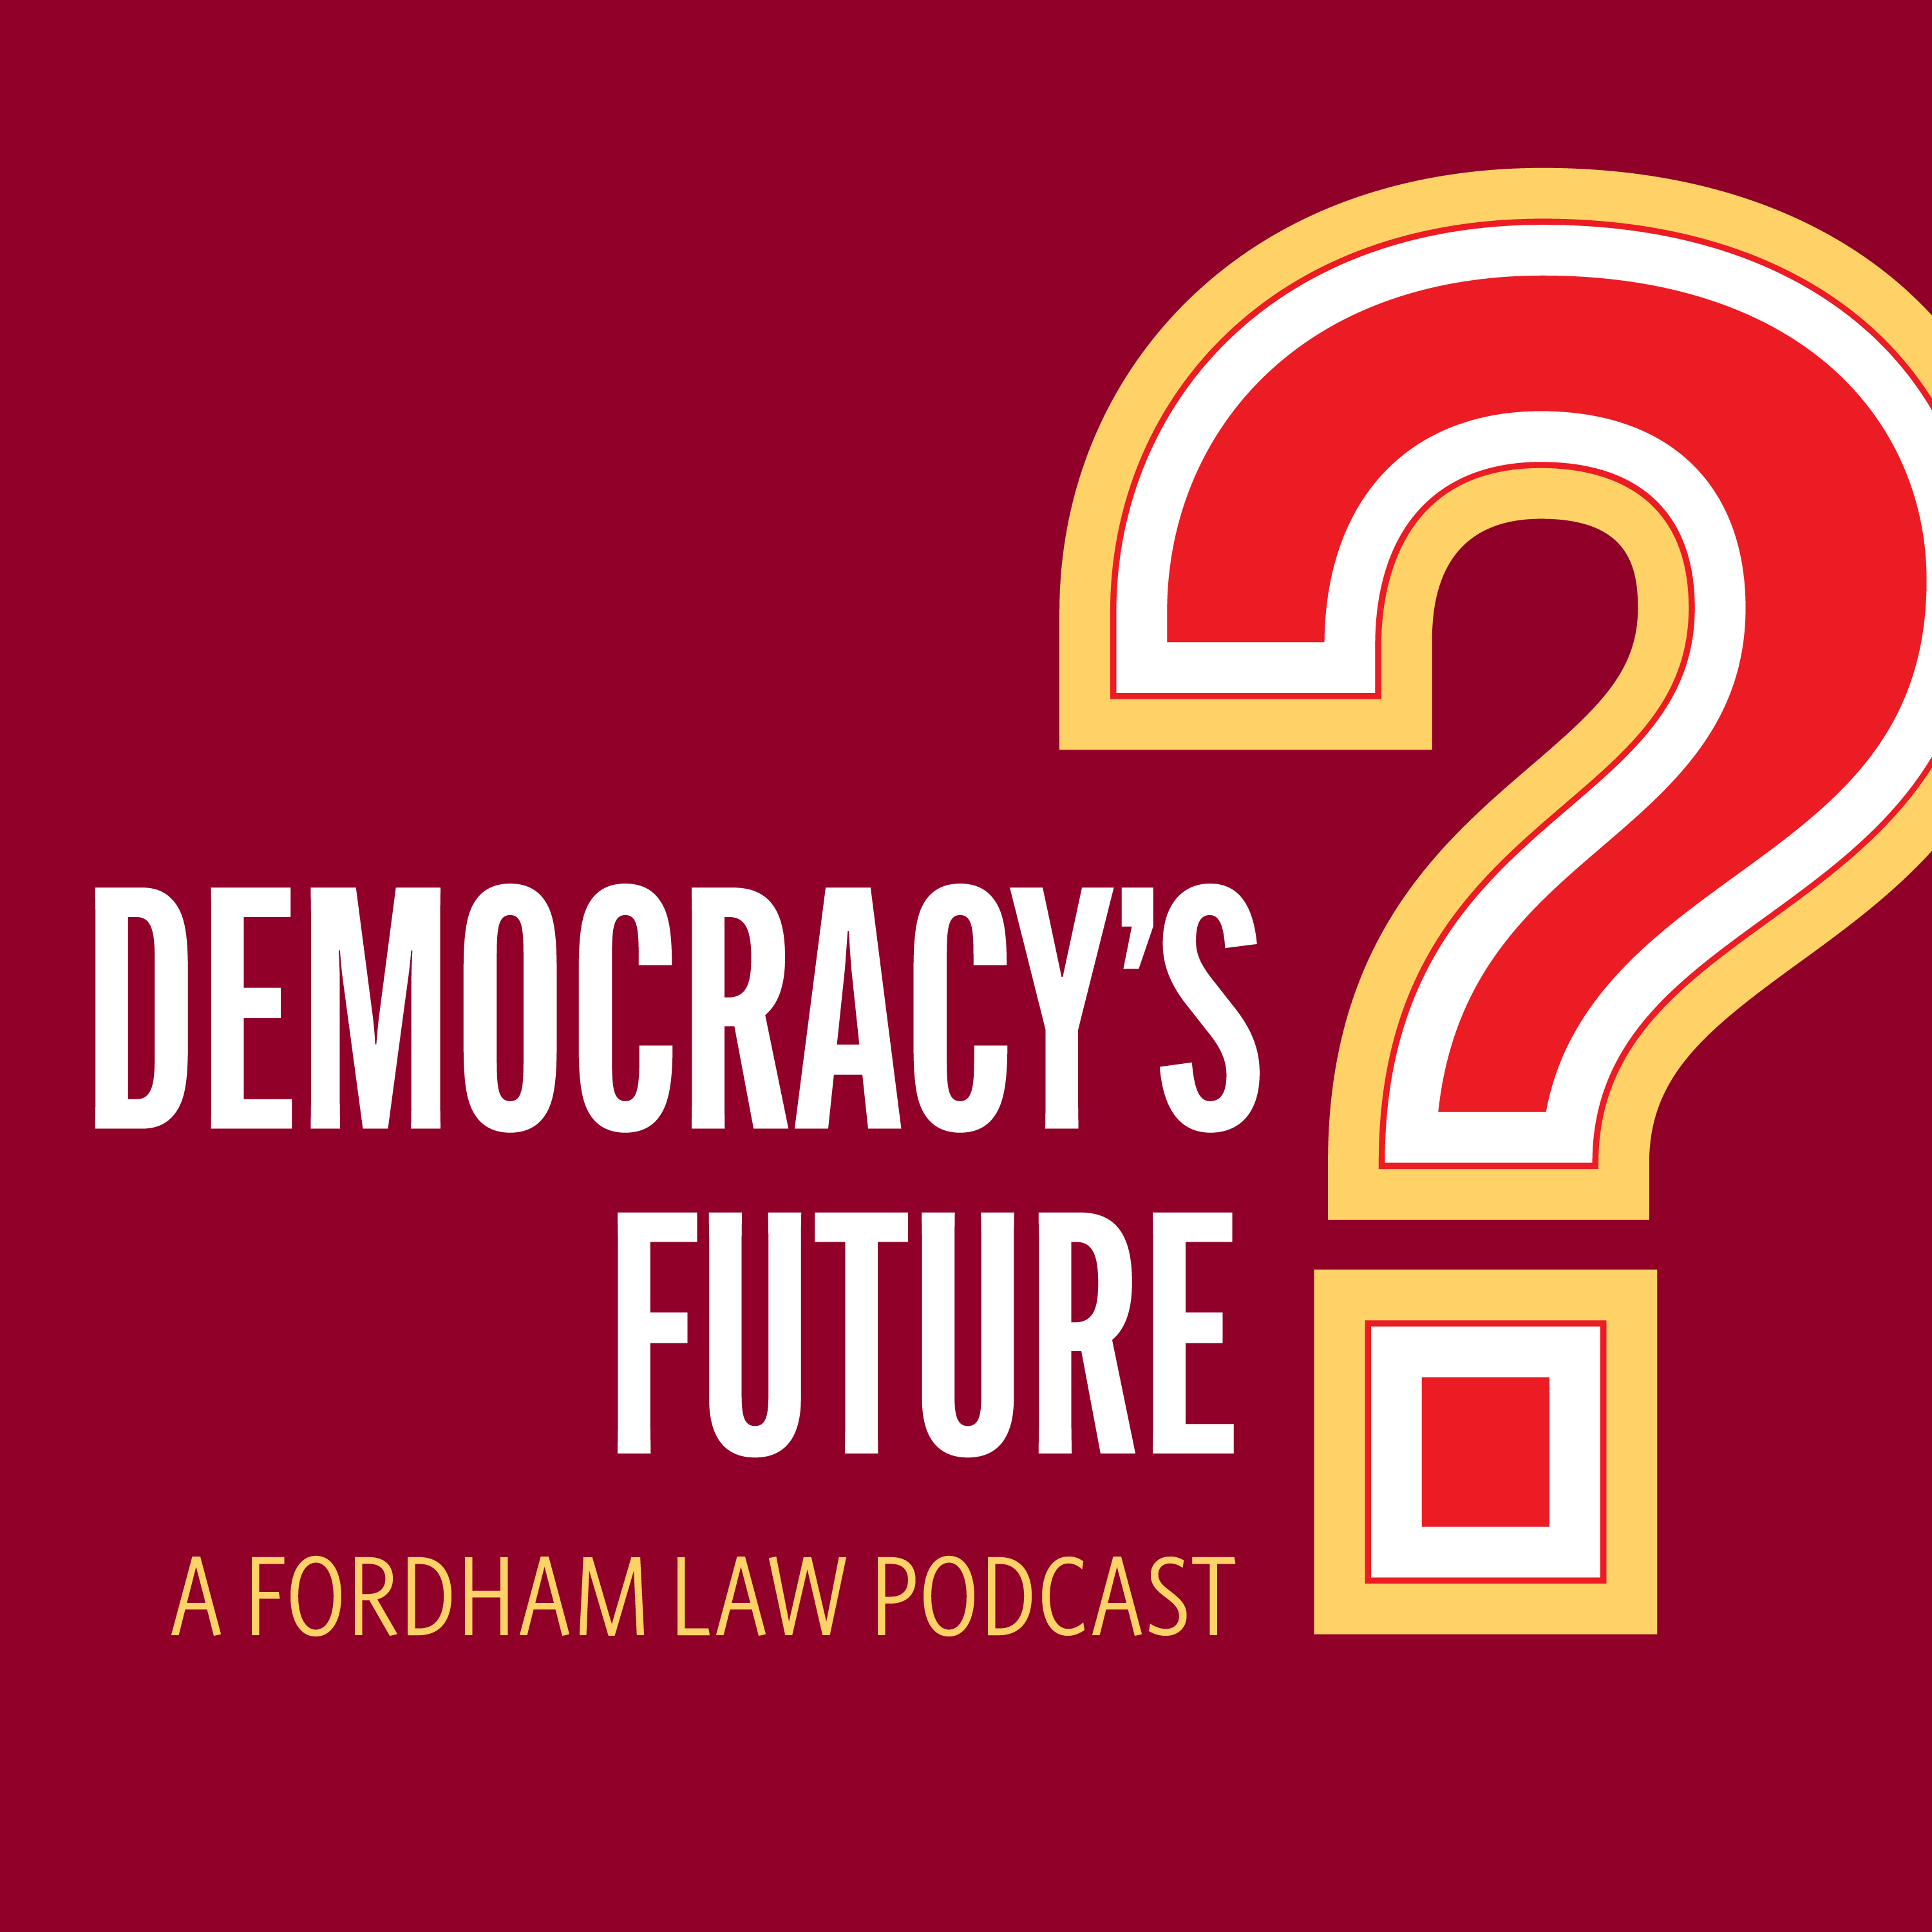 Fordham Faculty Podcast Democracy's Future